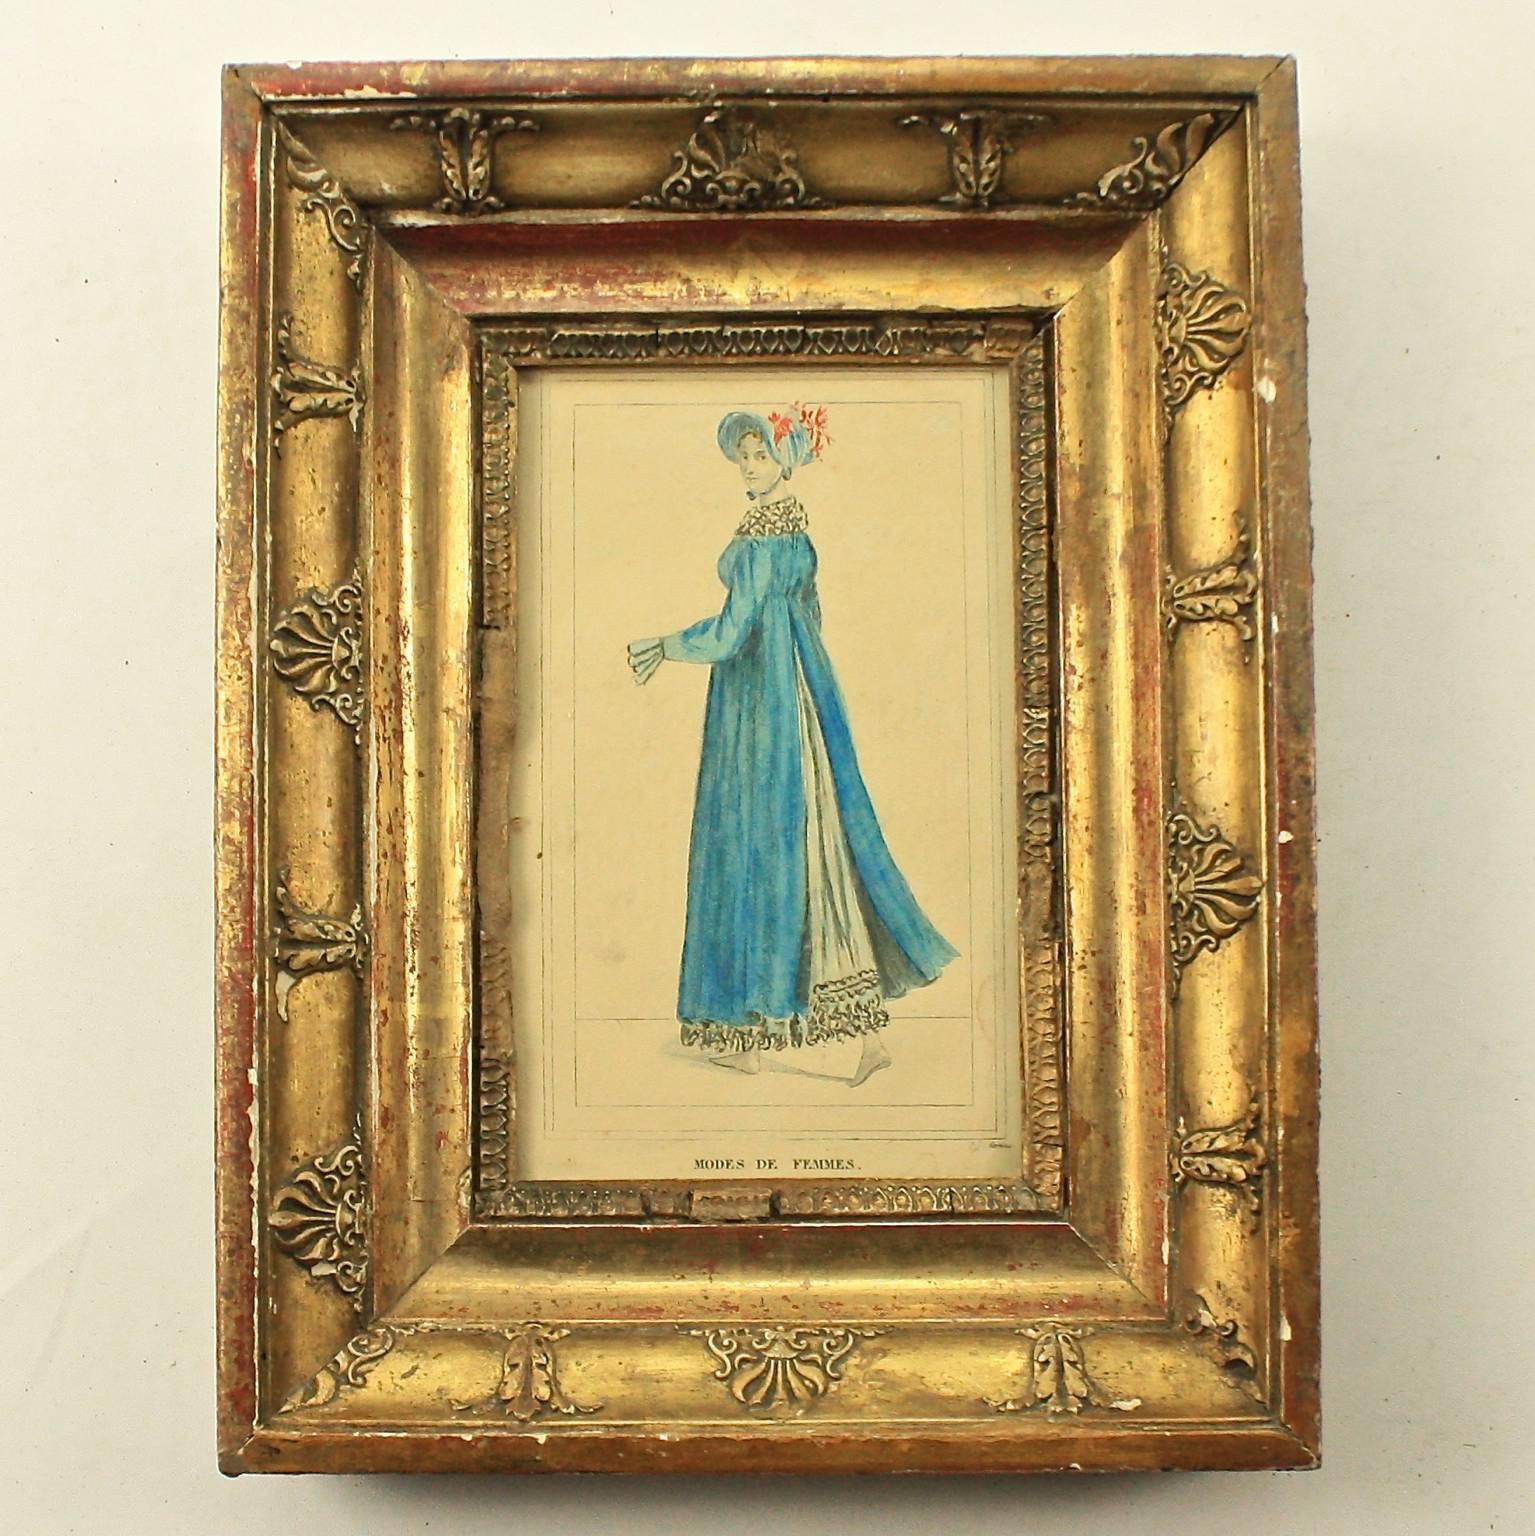 Set of four giltwood framed hand coloured fashion plates of two 'Modes d'Hommes' and two 'Modes de Femmes'. Fashion plates are 19th century images of the latest trends in clothing, accessories, and even hairstyles. Our plates were published by